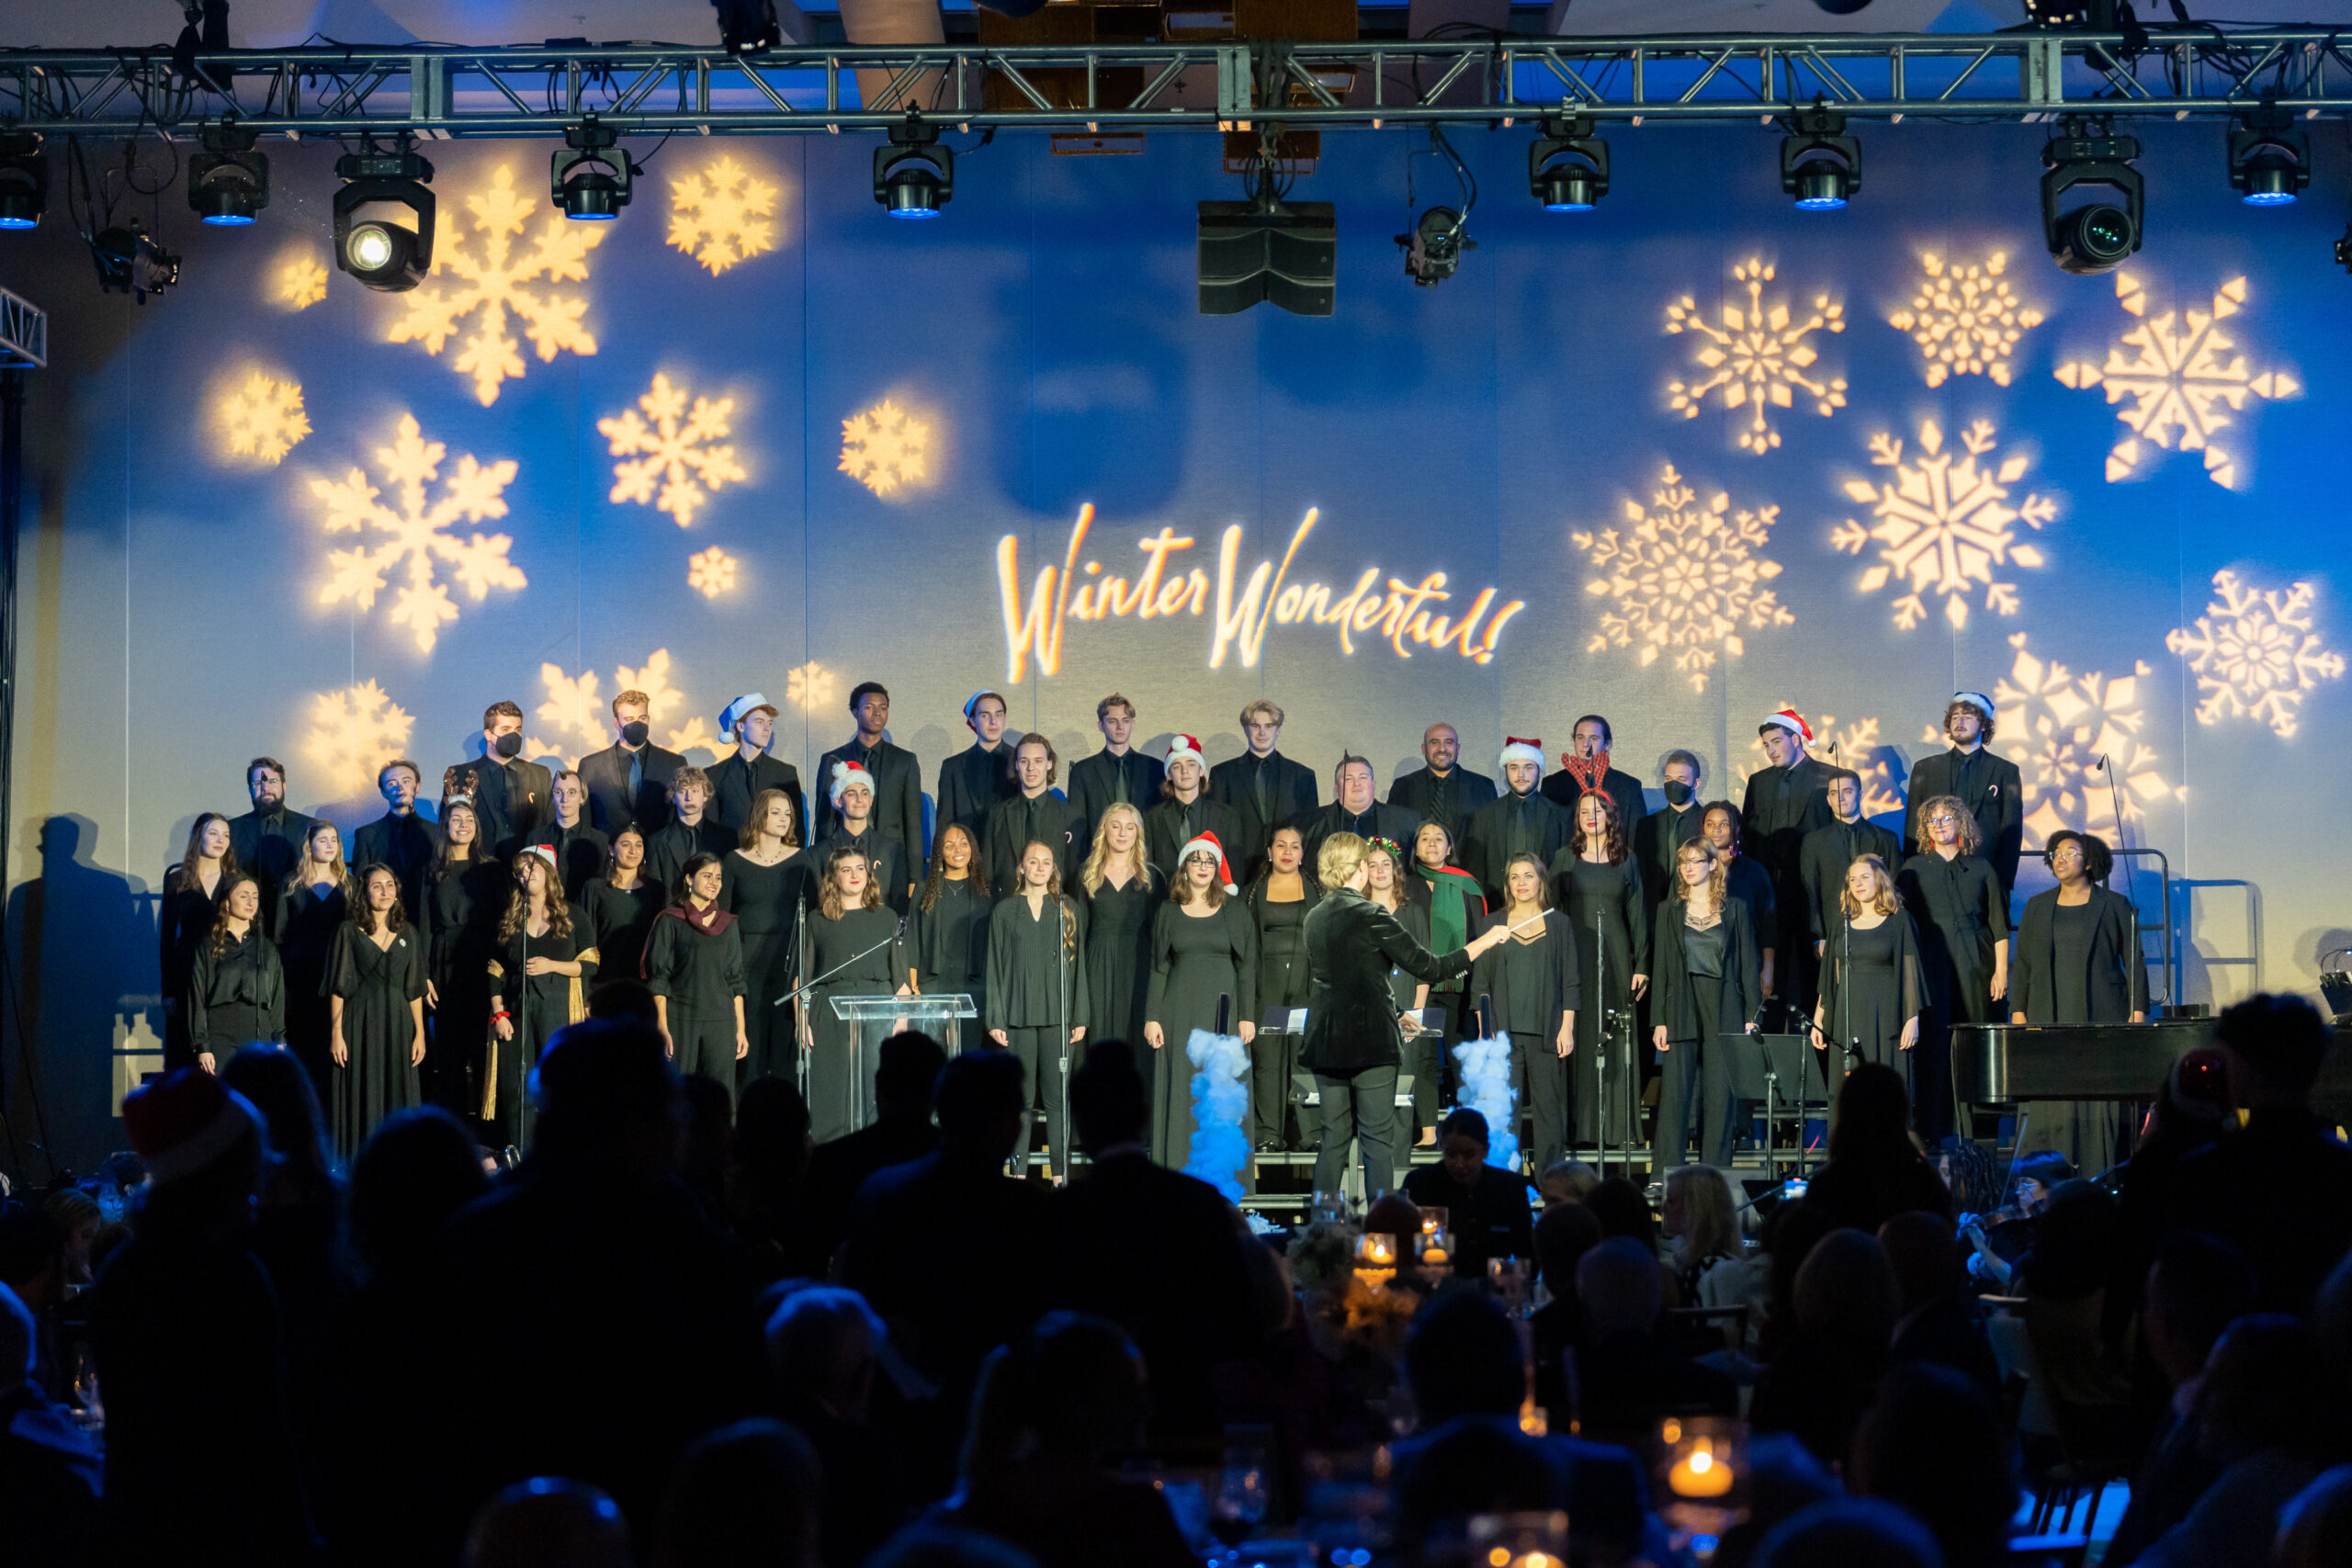 Frost Symphony Orchestra and Chorale students performing at the Frost School of Music’s Winter Wonderful gala at the JW Marriott Marquis in Miami on Dec. 4th, 2022. Photo by Kikor.